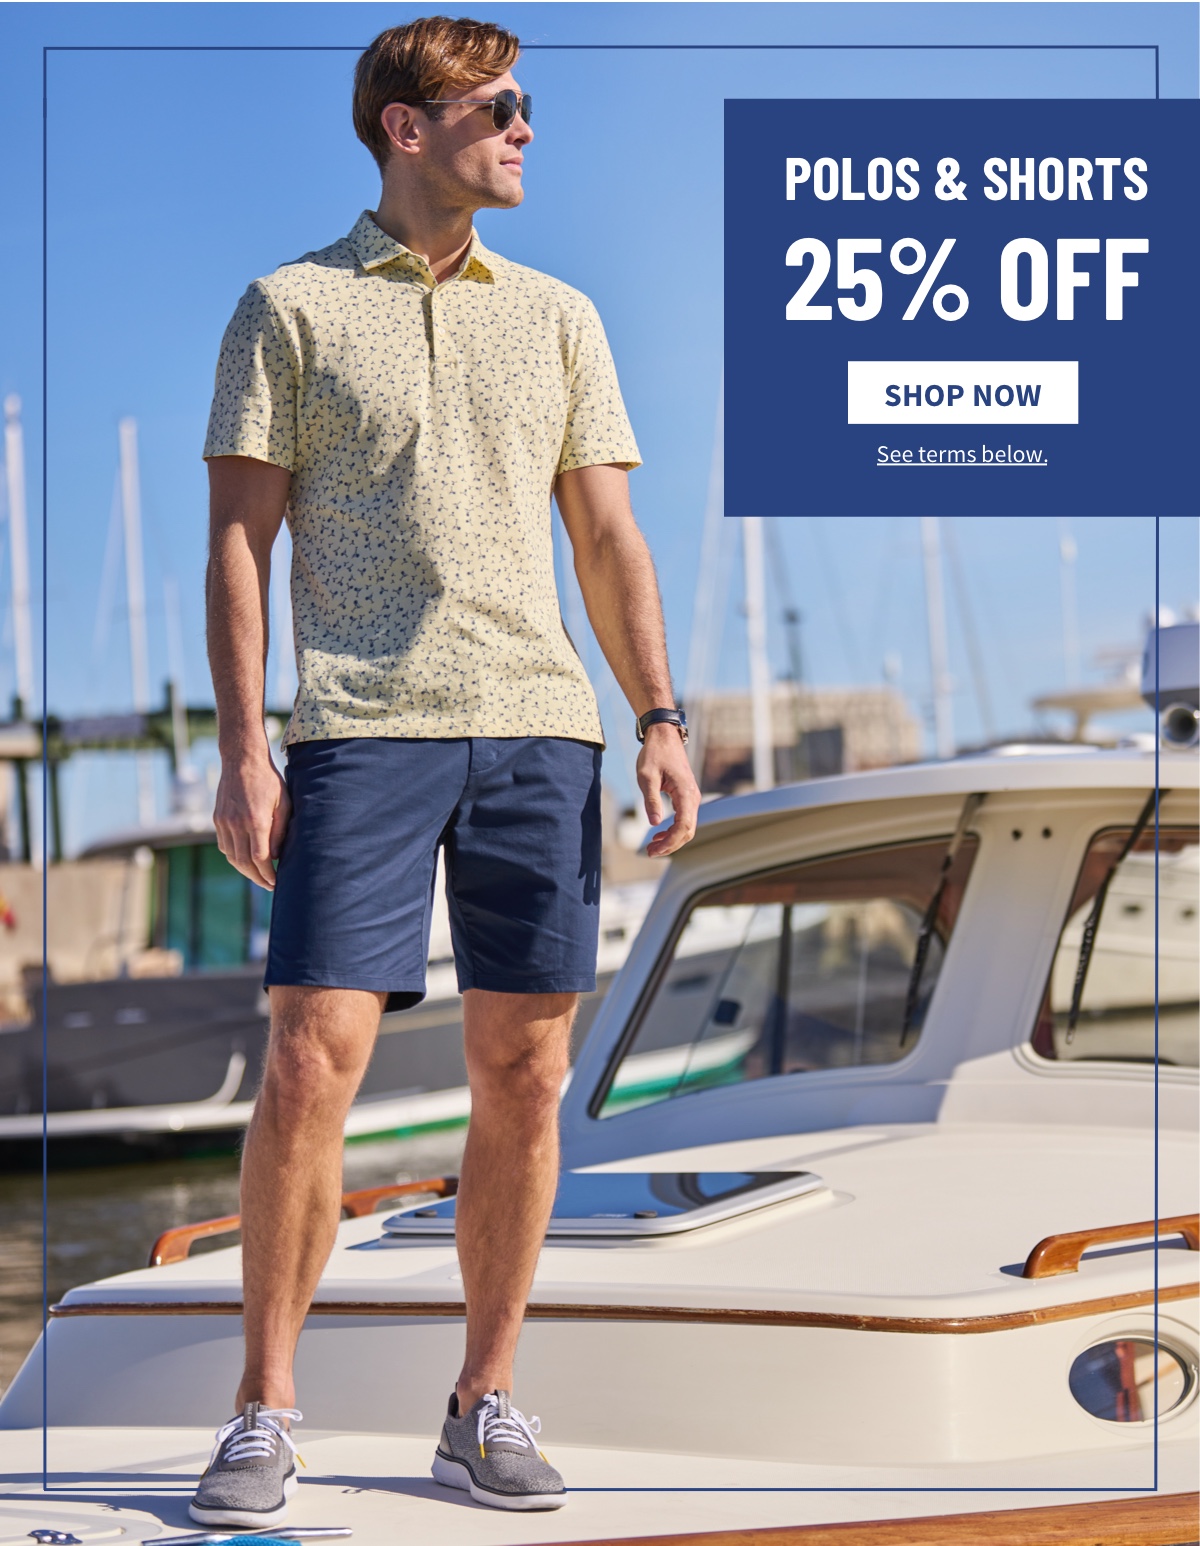 25% off Entire Store and Online* *Excludes custom. No additional markdown on Clearance items. See terms below.  Polos and Shorts 25% off Shop Now See terms below.